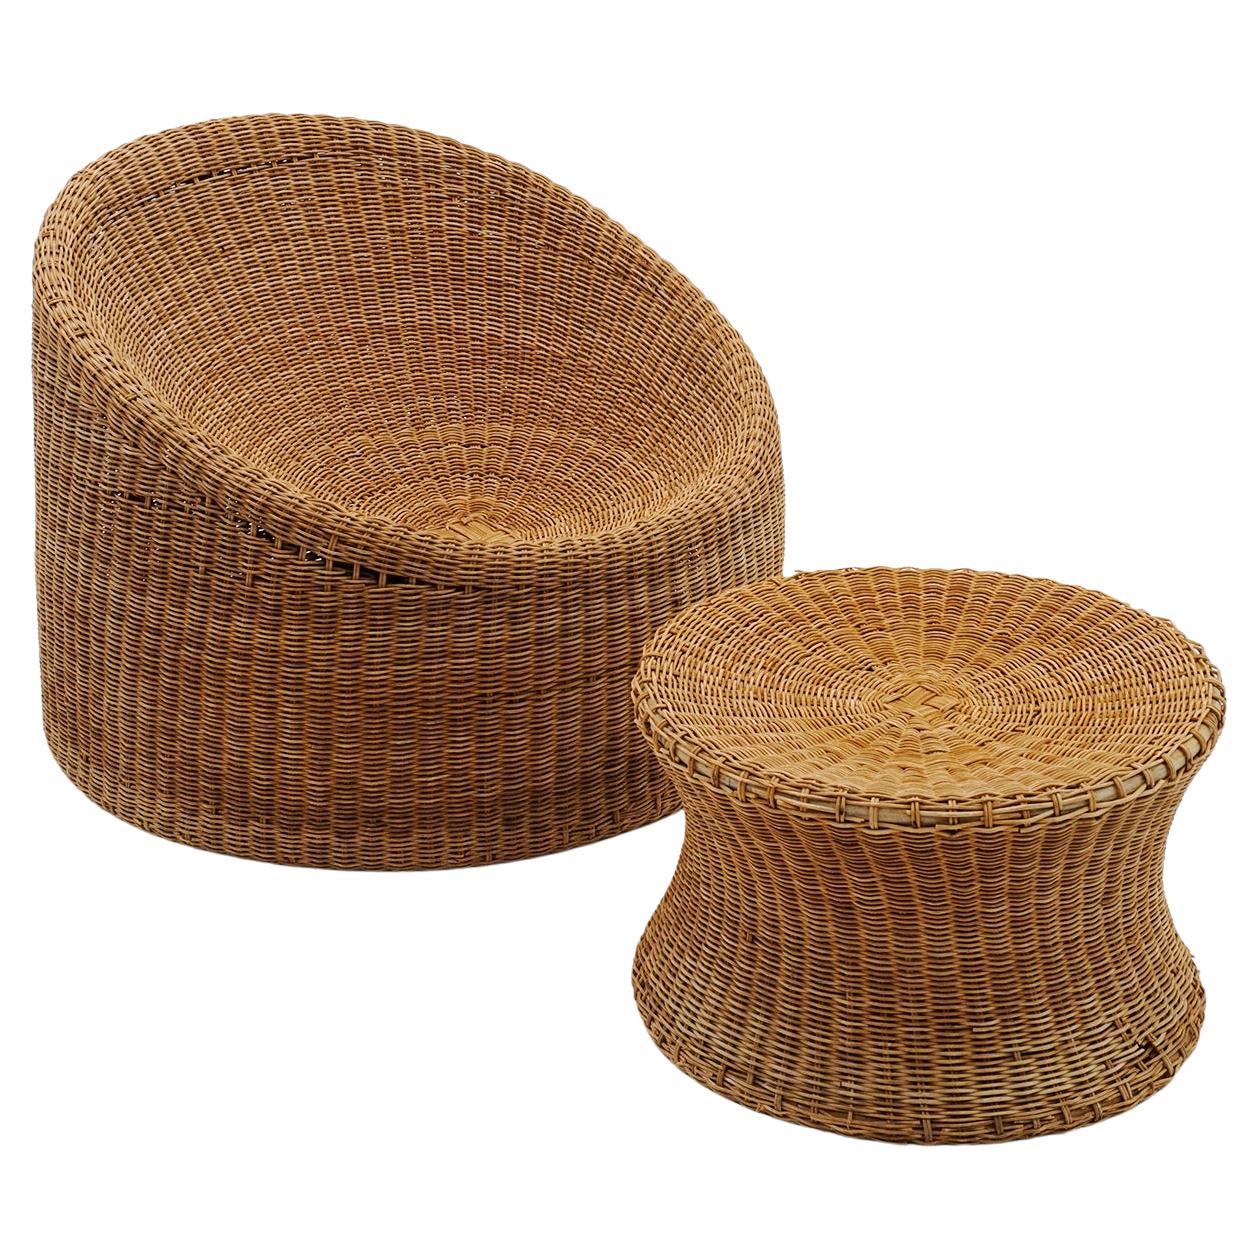 Wicker Chair and Ottoman by Eero Aarnio, Finland, 1960s